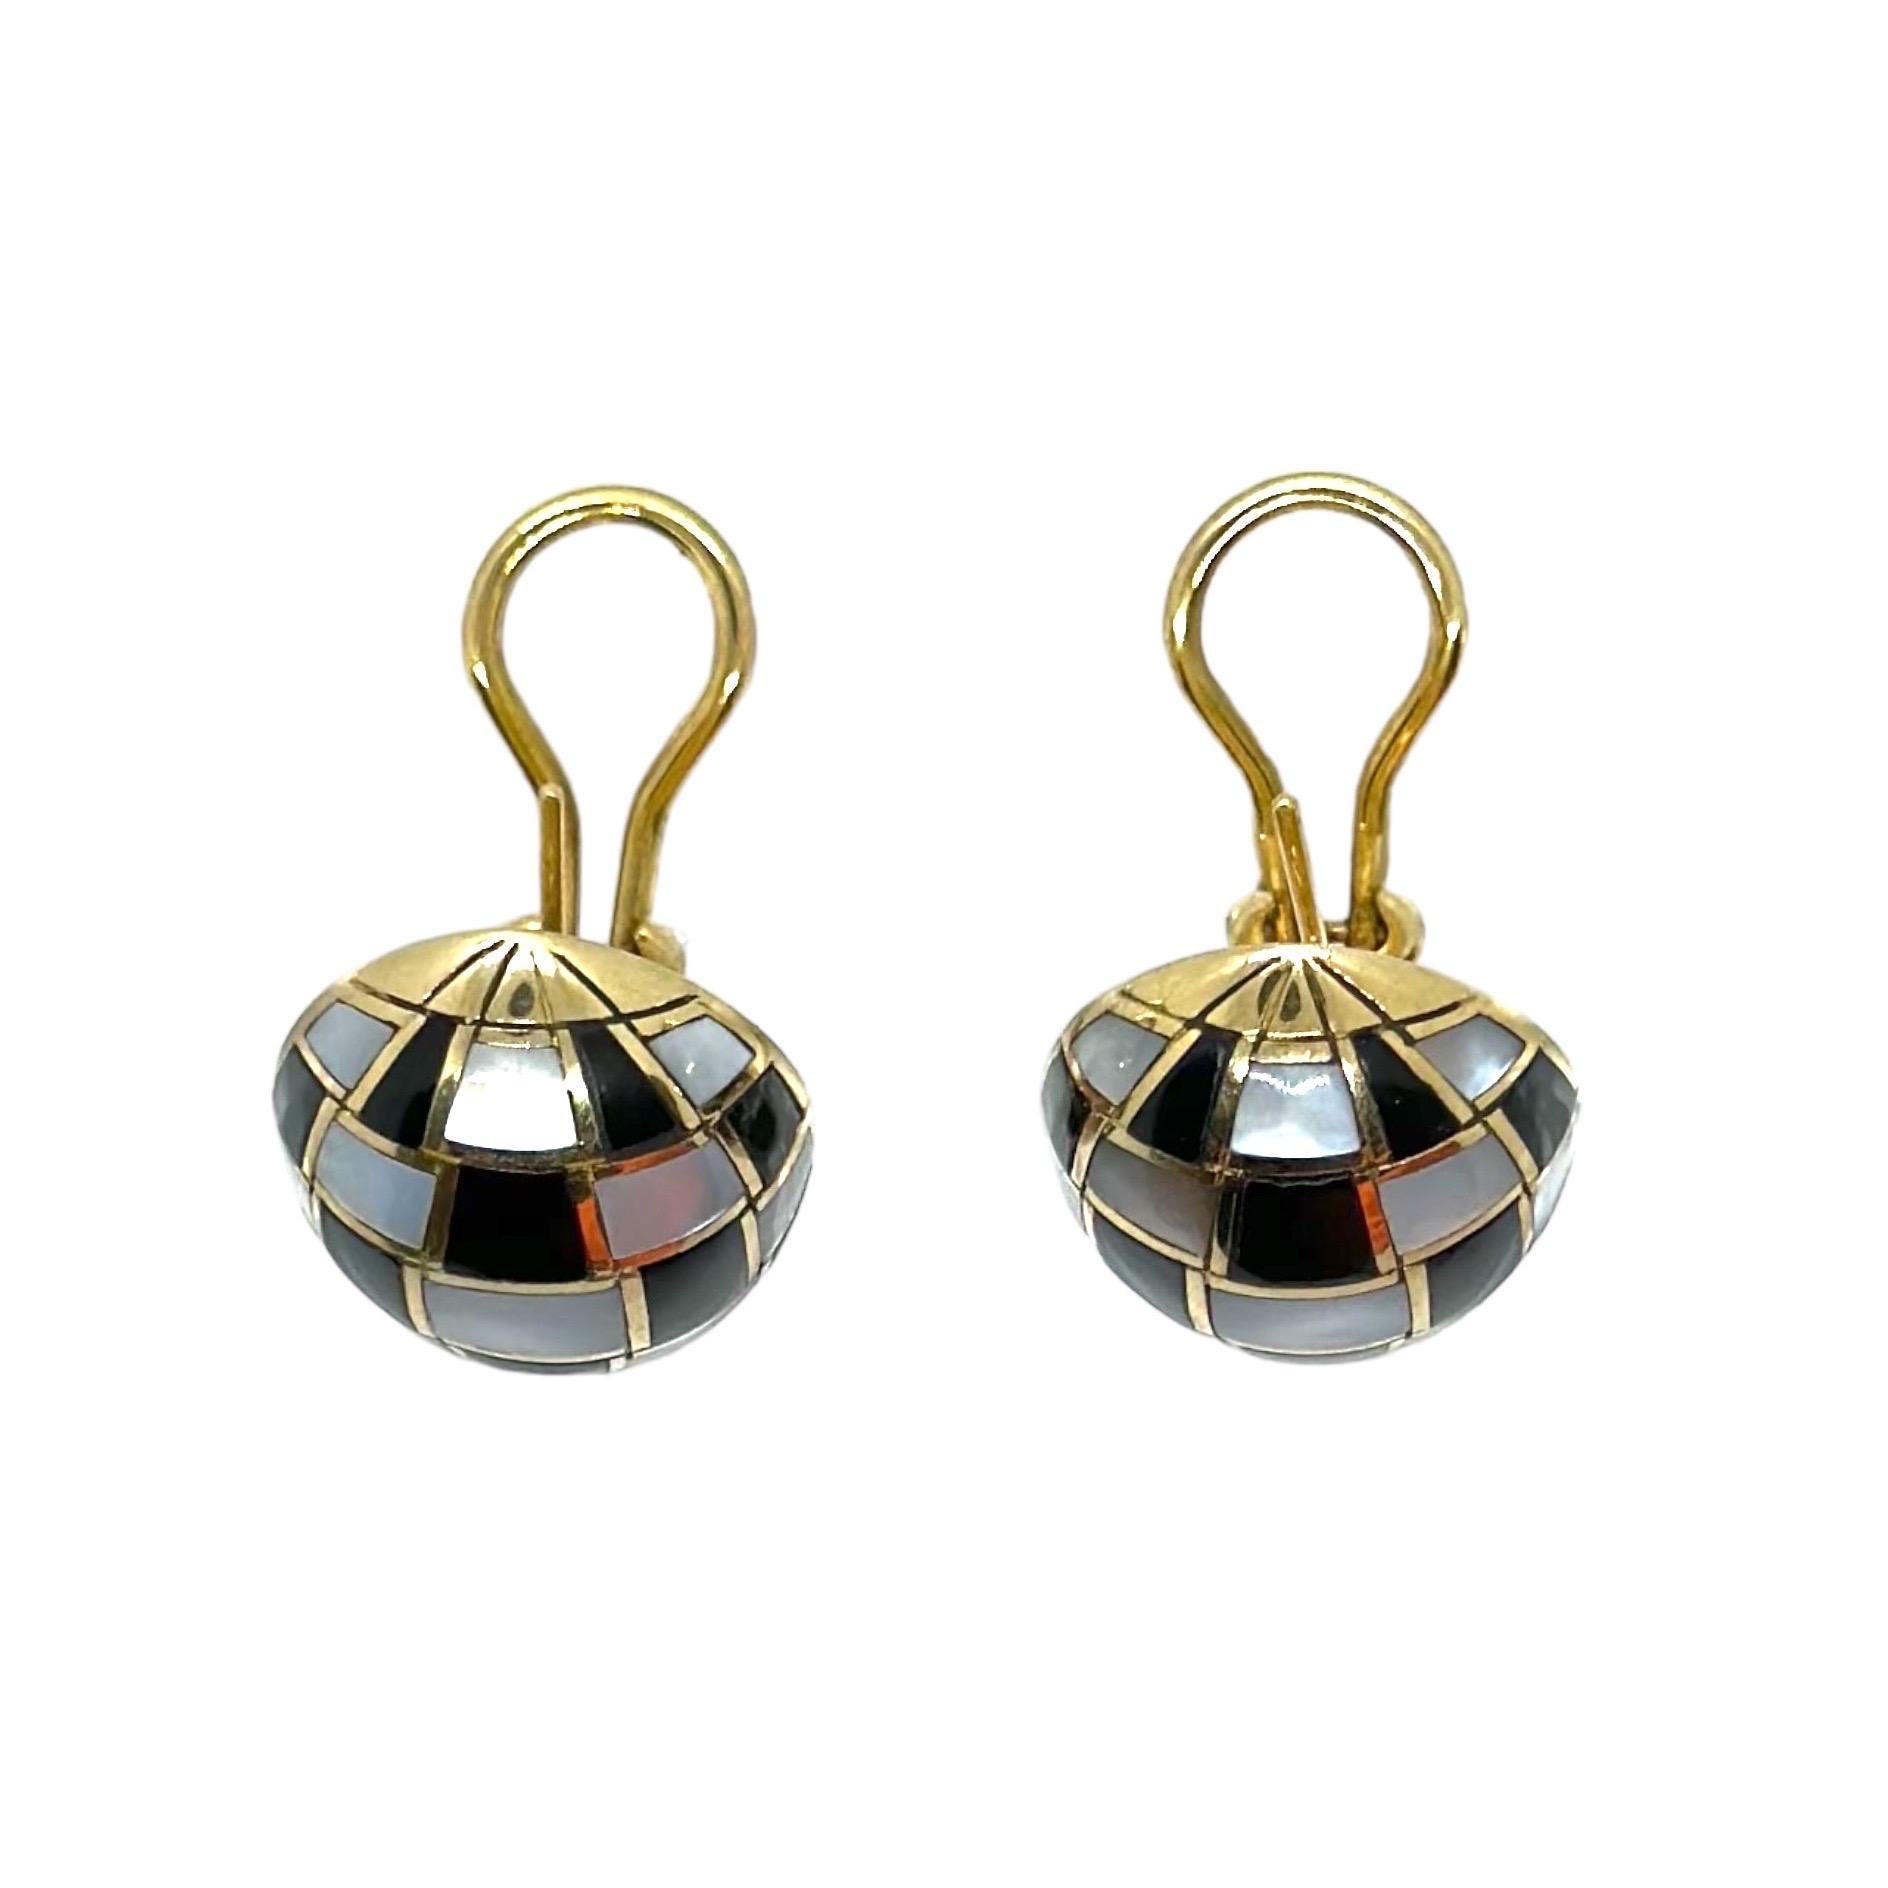 Shield Cut Rare Vintage 18K Yellow Gold Earrings with Onyx and Mother of Pearl Inlay For Sale